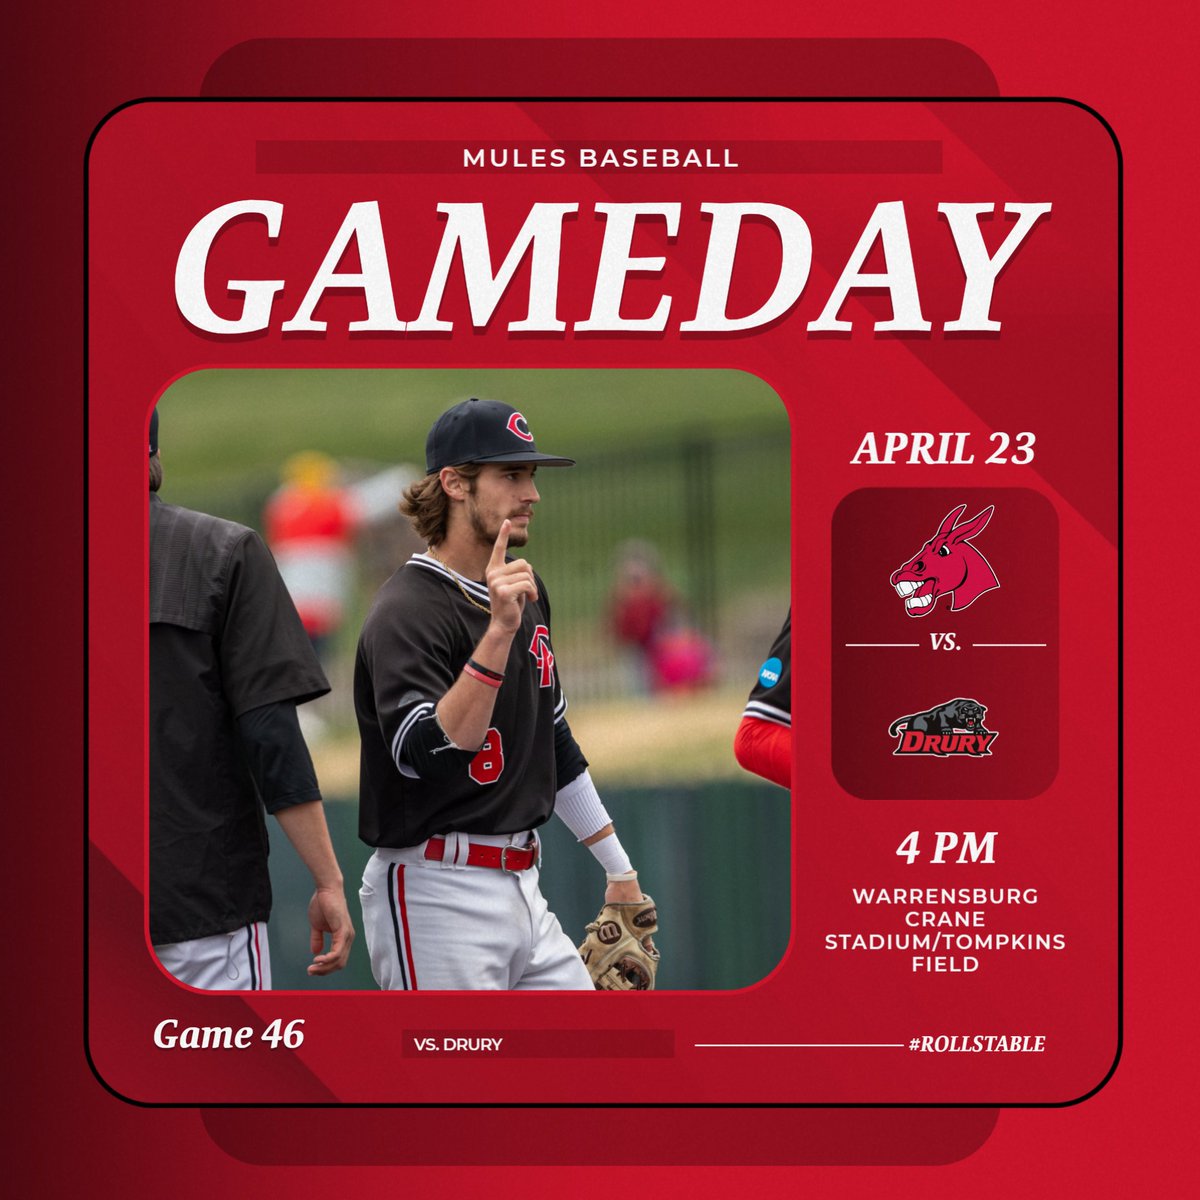 Back home for a Tuesday afternoon tussle with the Panthers! 🆚 | Drury 🏟️ | Crane Stadium/Tompkins Field 📻 | 98.5 The BAR 🔊 | WarrensburgRadio.com 💻 | TheMIAANetwork.com/UCMMULES ($) 🌭 | $1 hot dogs & sodas thanks to Sodexo (first 300 fans) #teamUCM x #RollStable